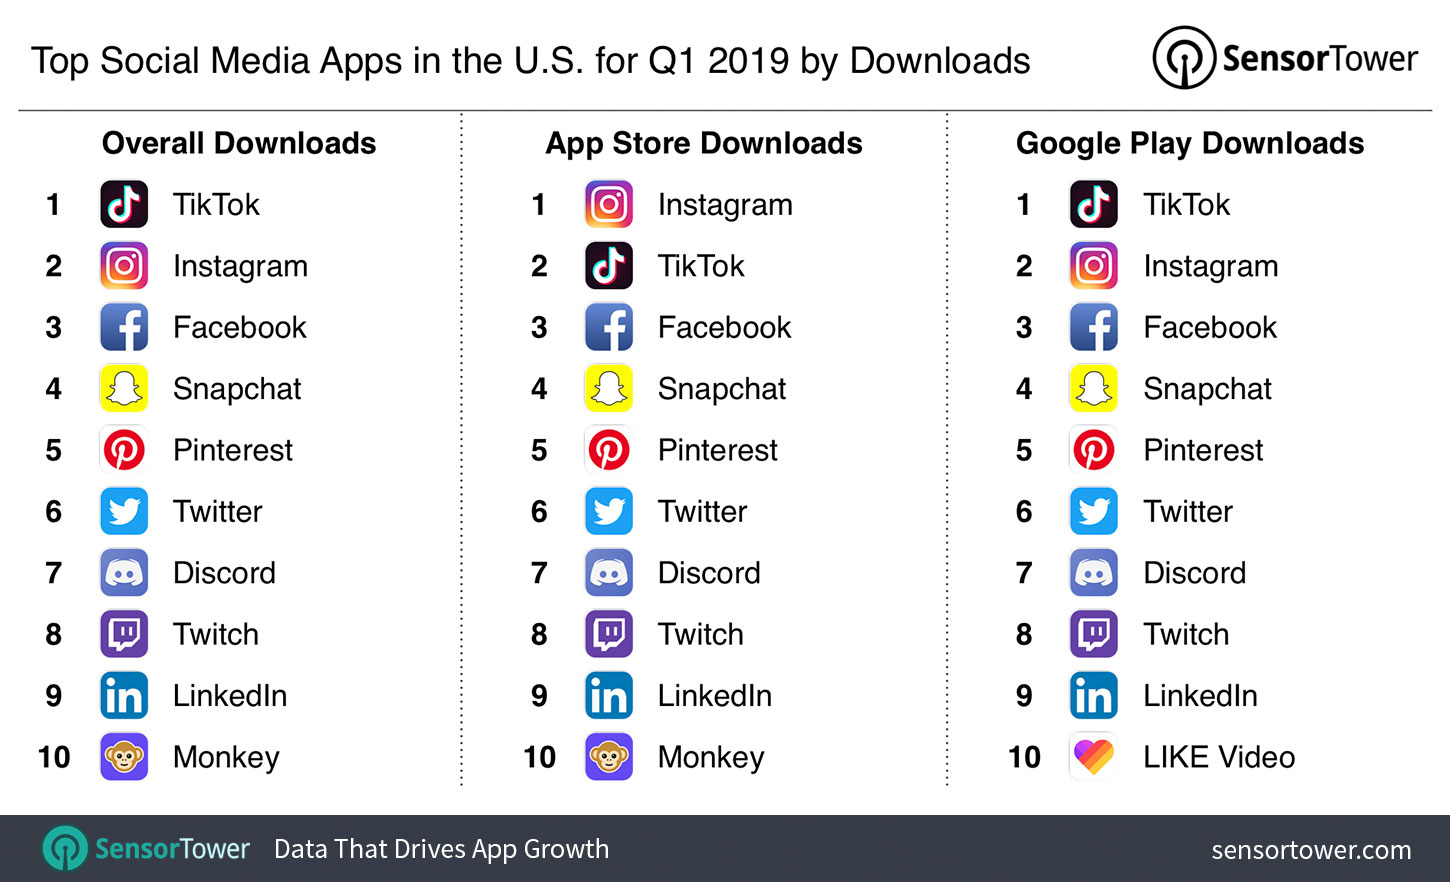 Top Social Media Apps in the U.S. for Q1 2019 by Downloads - infographic